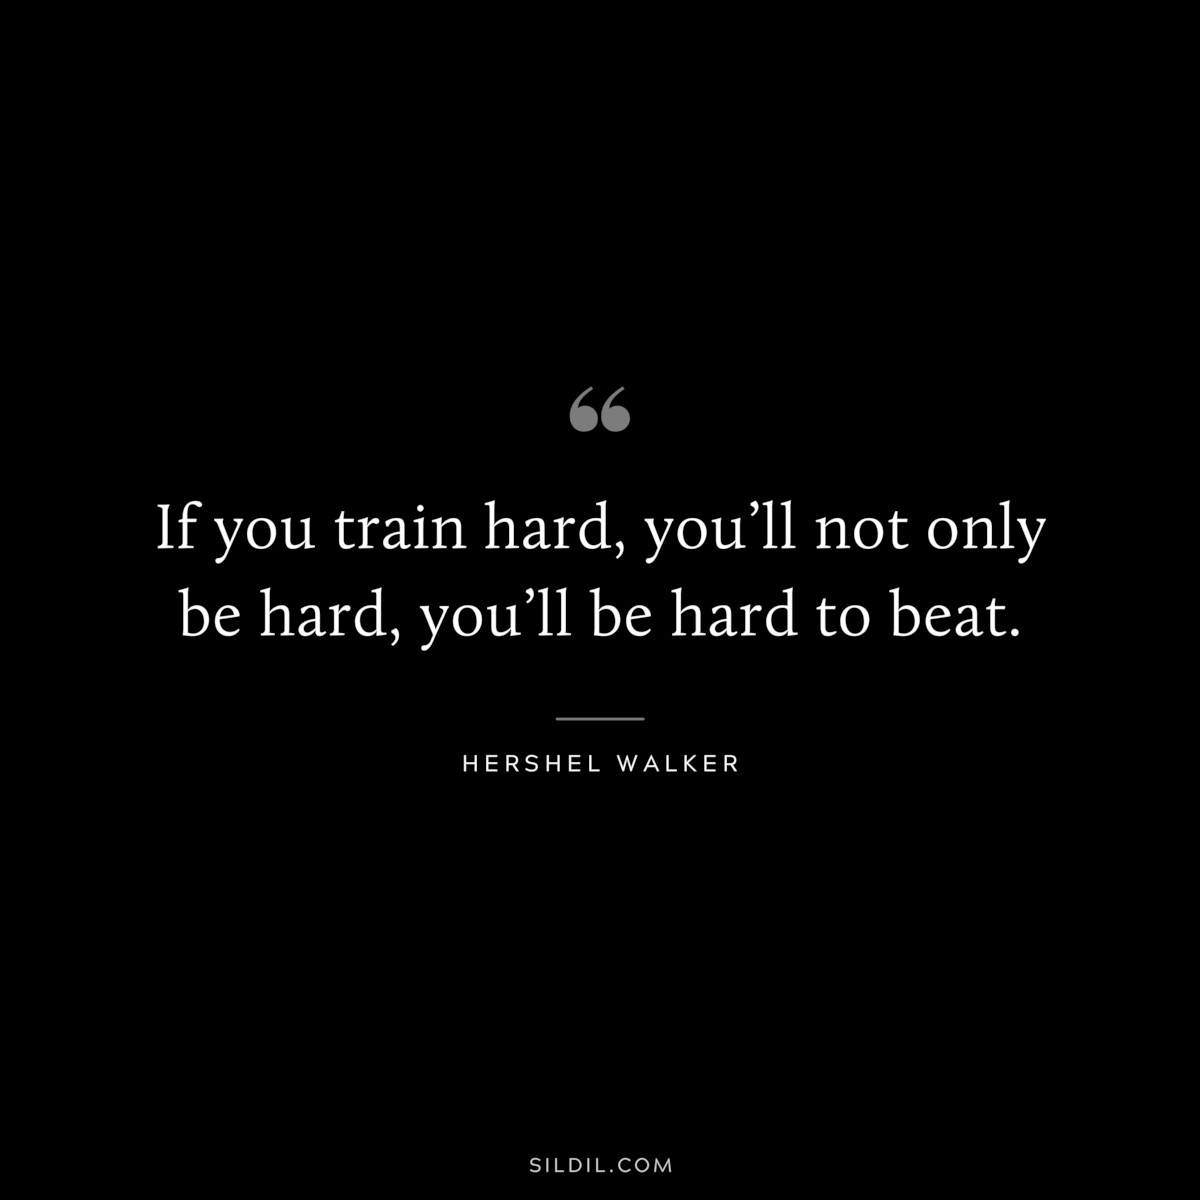 If you train hard, you’ll not only be hard, you’ll be hard to beat. ― Hershel Walker